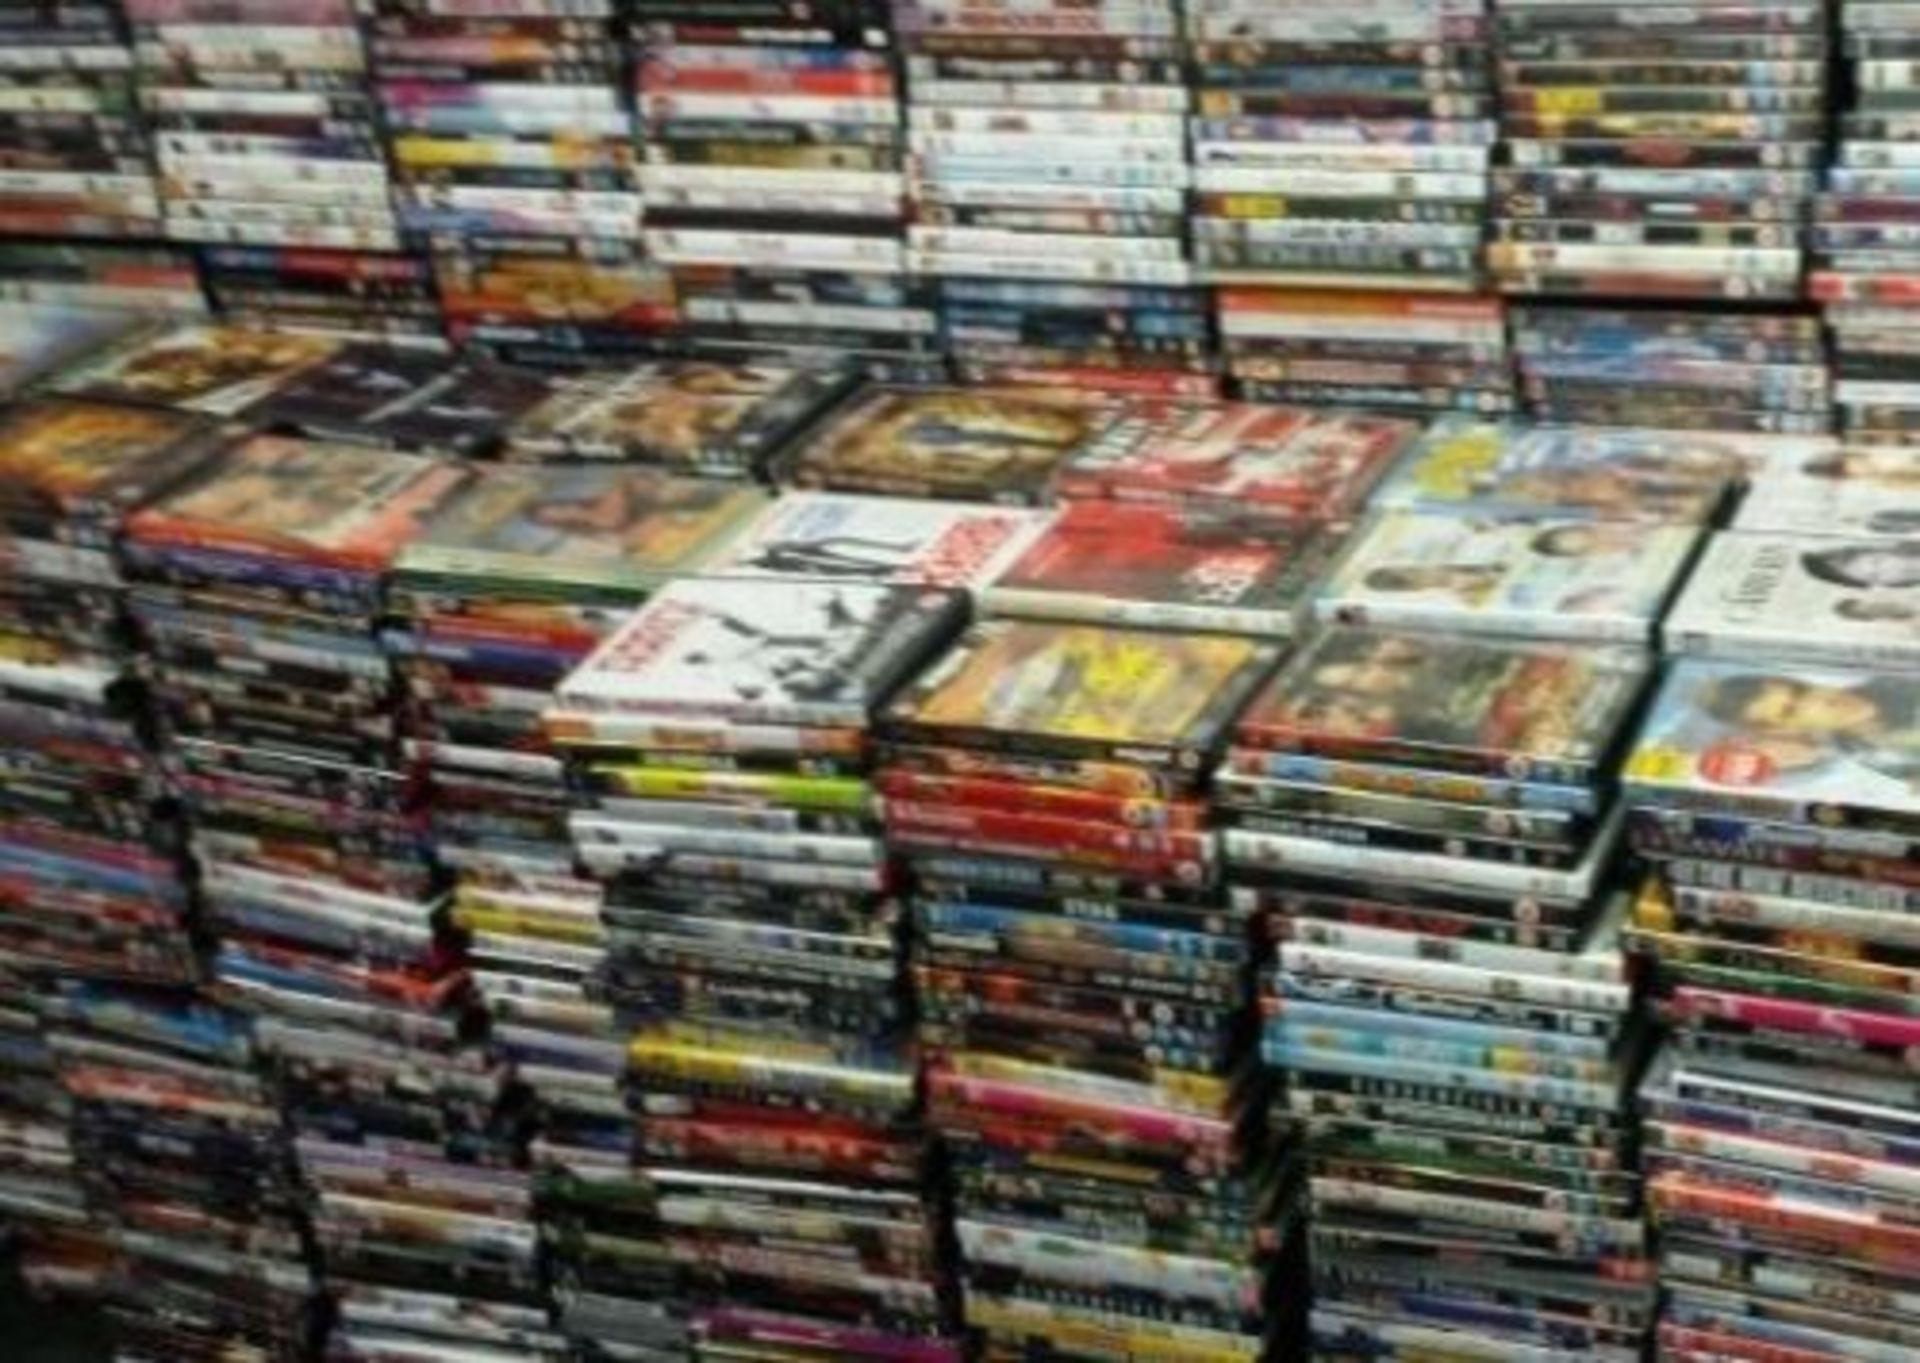 JOB LOT OF 100 x VARIOUS DVD'S - REGION 2 - USED - GOOD ASSORTMENT OF TITLES - NO RESERVE - Image 4 of 5